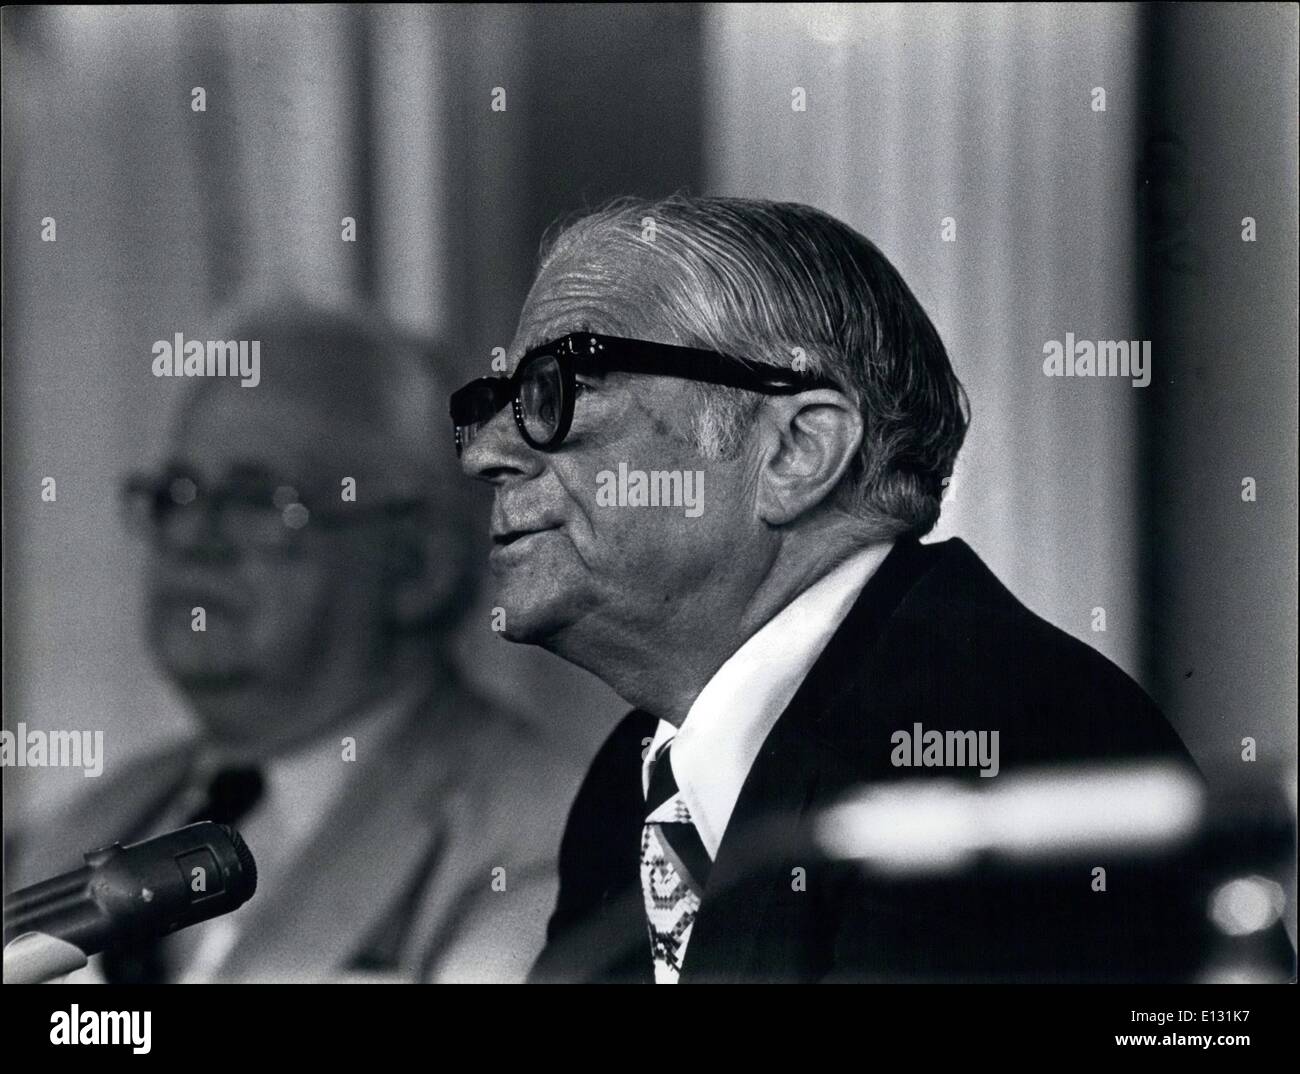 Feb. 26, 2012 - Mayor Abraham Beame at a Press Conference New York. July 1975 ESS.c Stock Photo